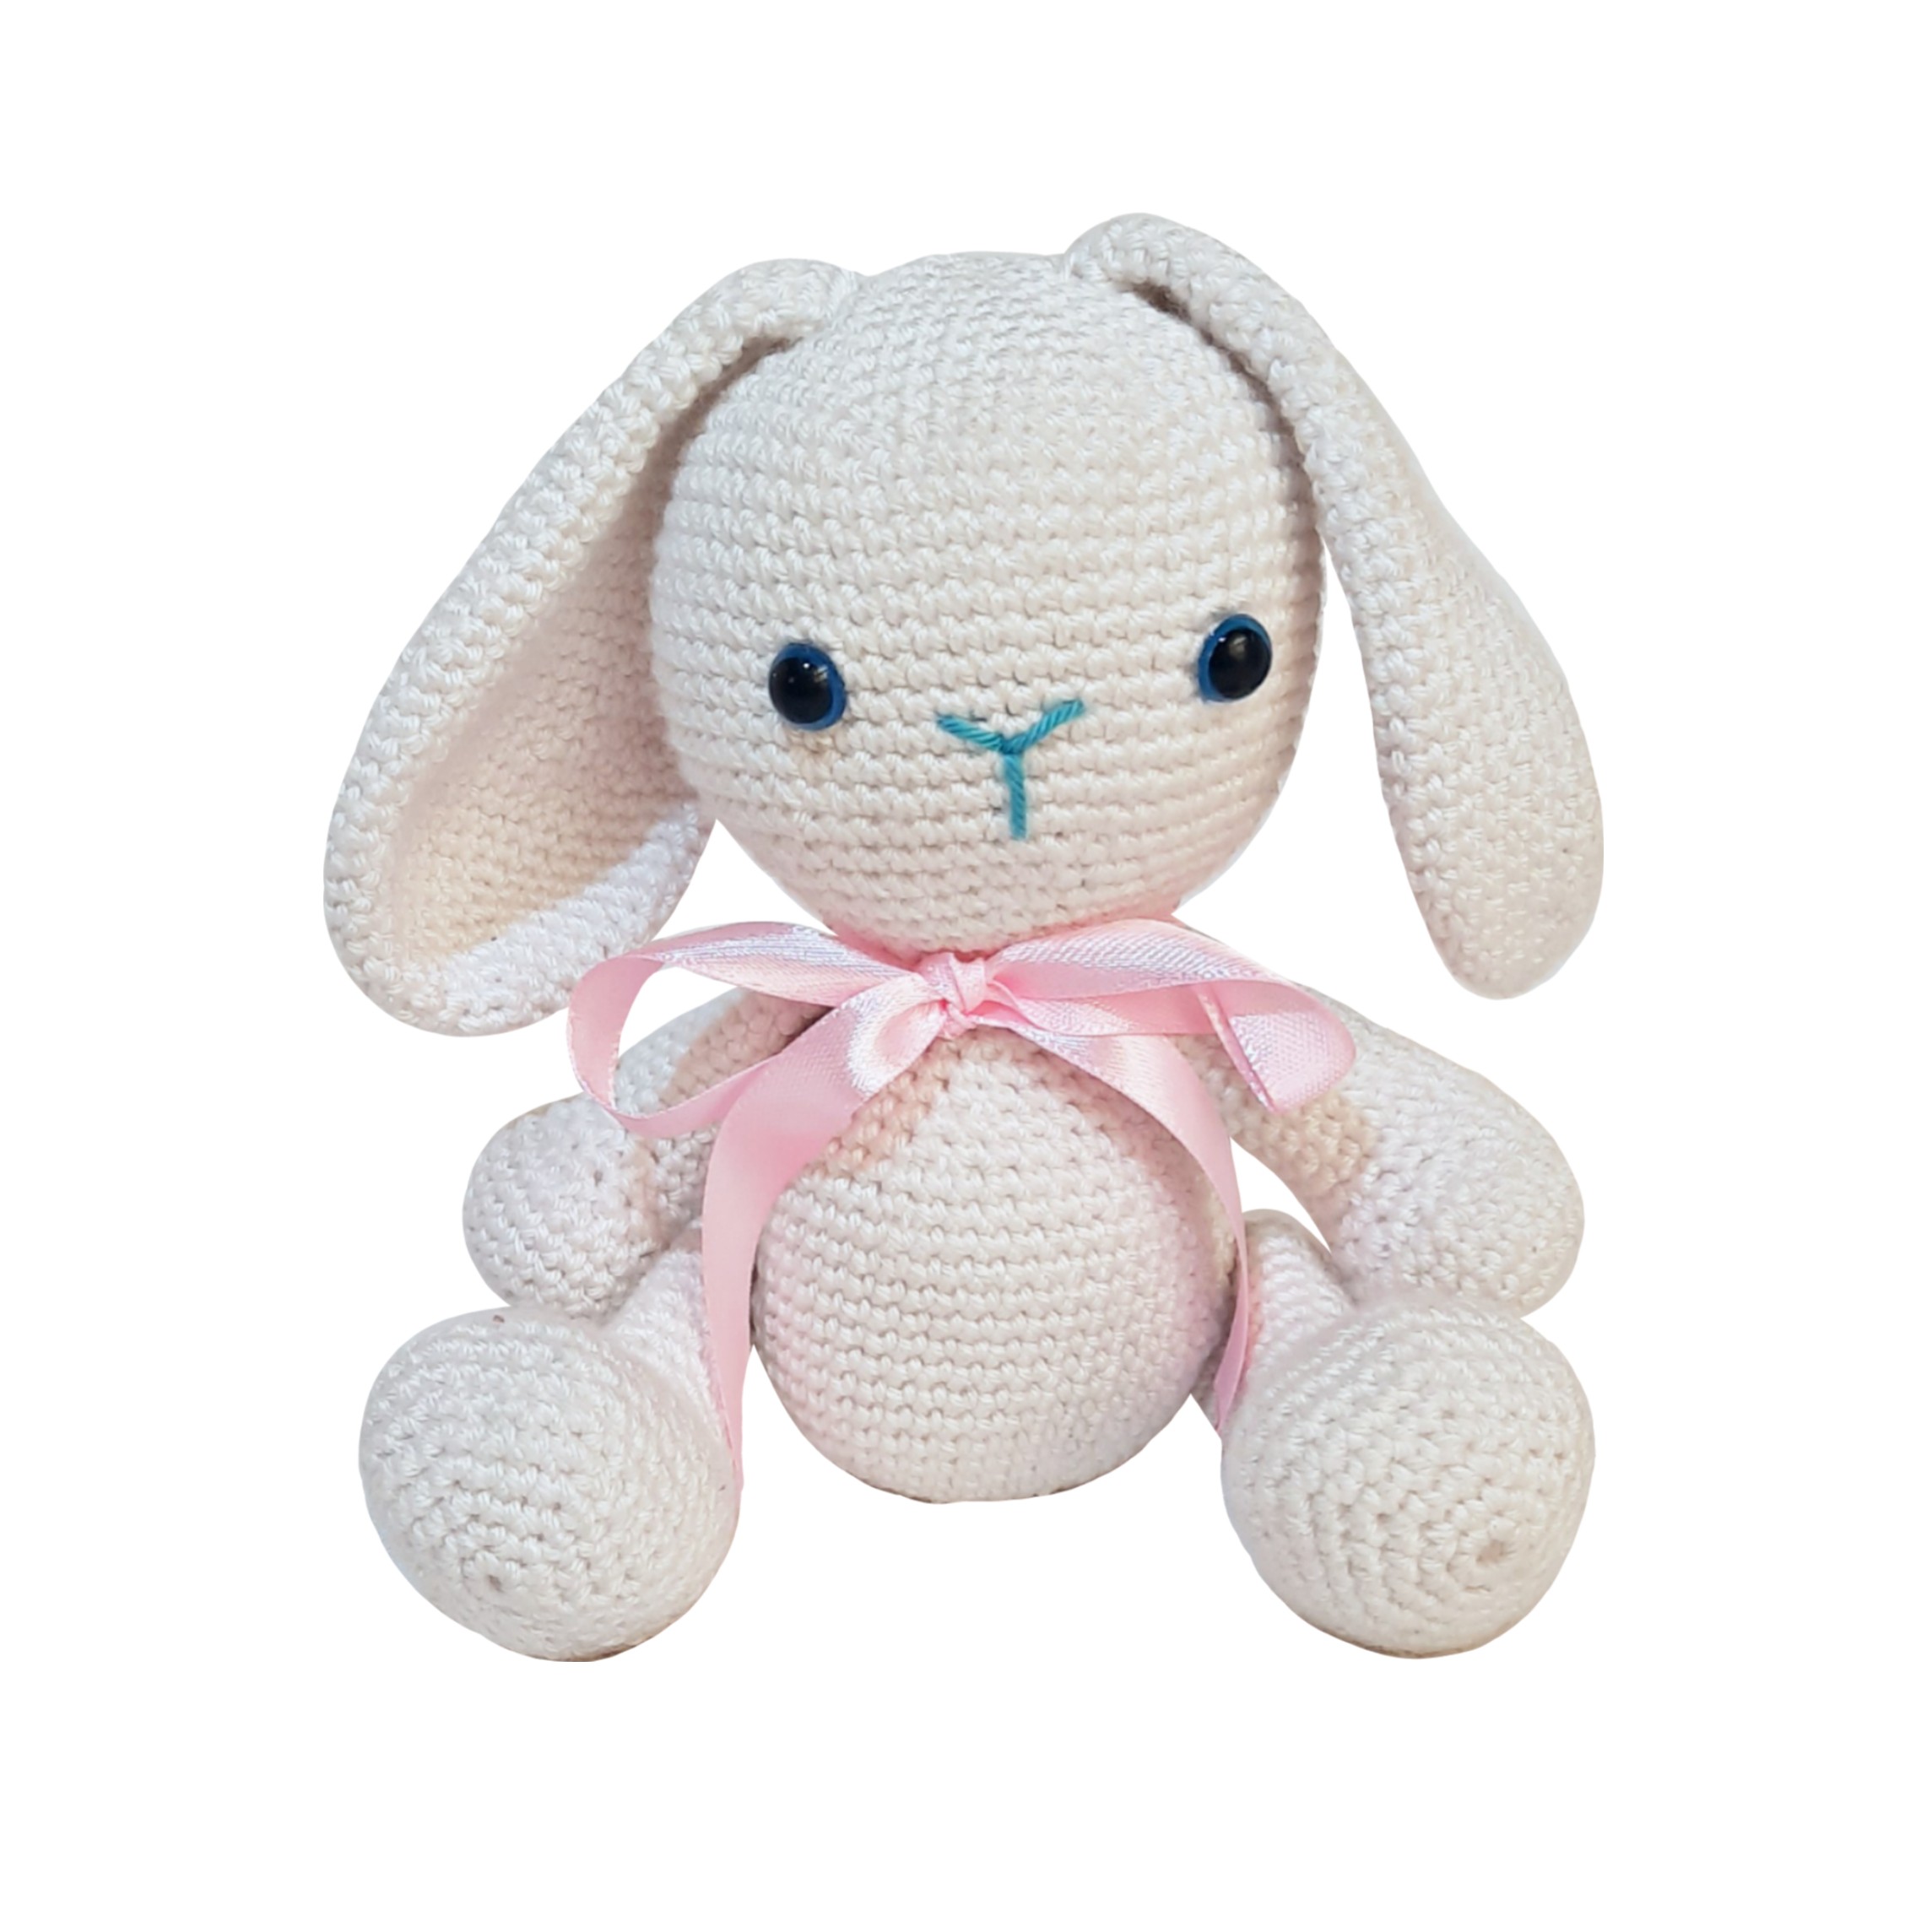 Pikkaboo - Snuggle & Play Crocheted Bunny - White